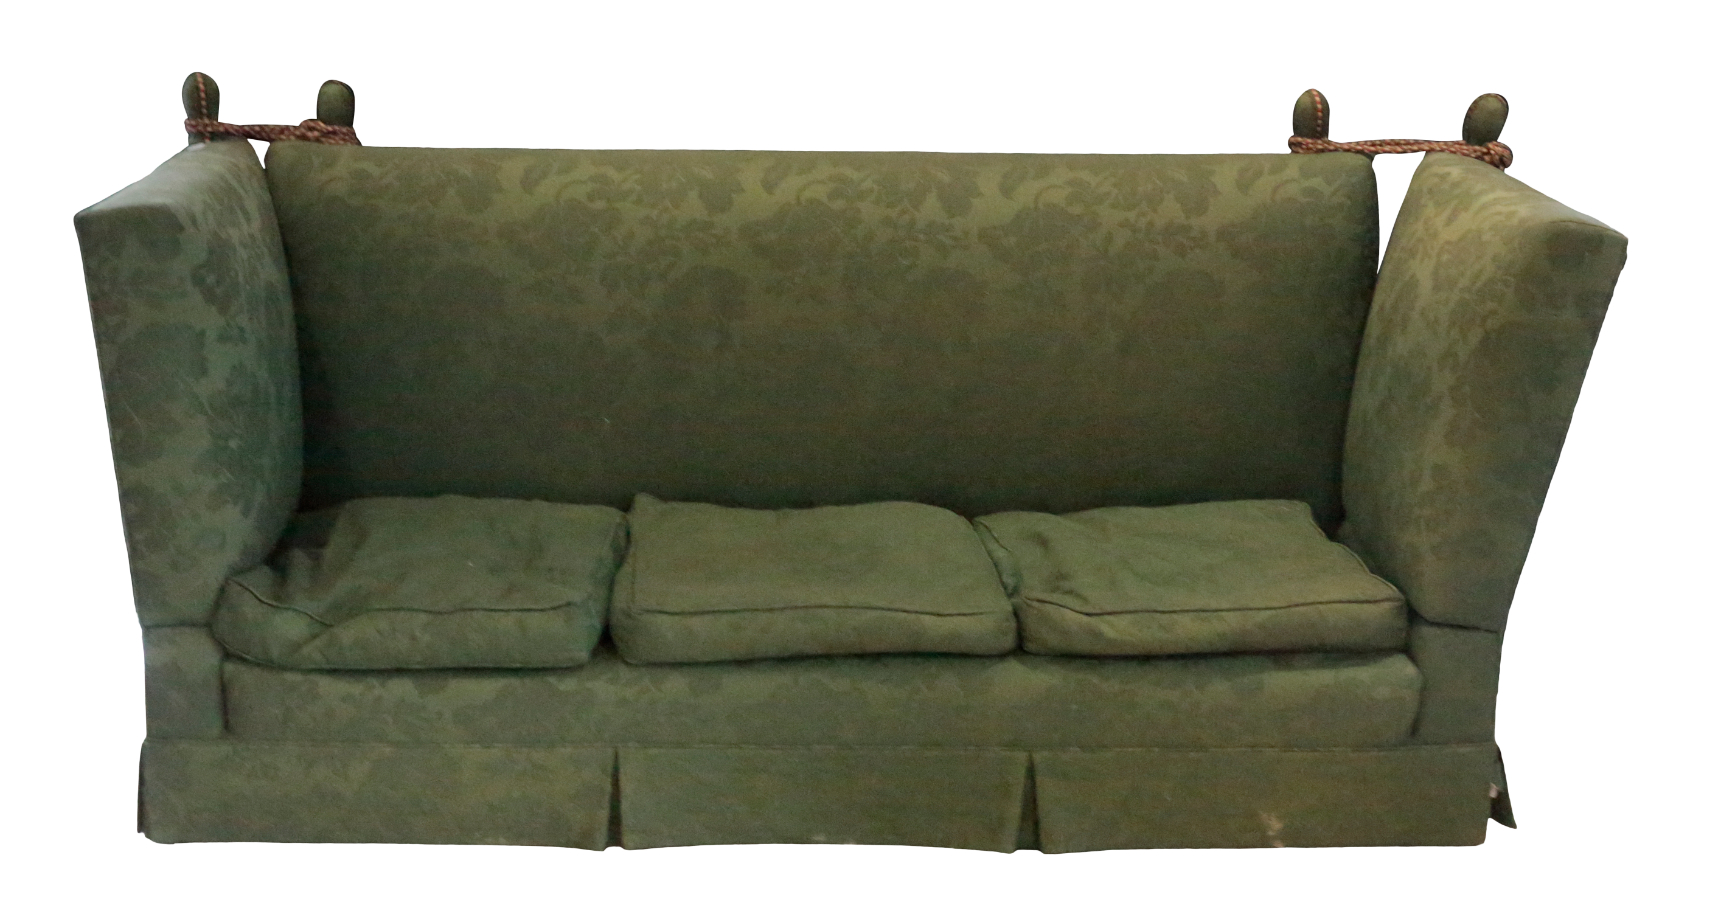 A KNOLE SOFA with green damask 3ae0fe